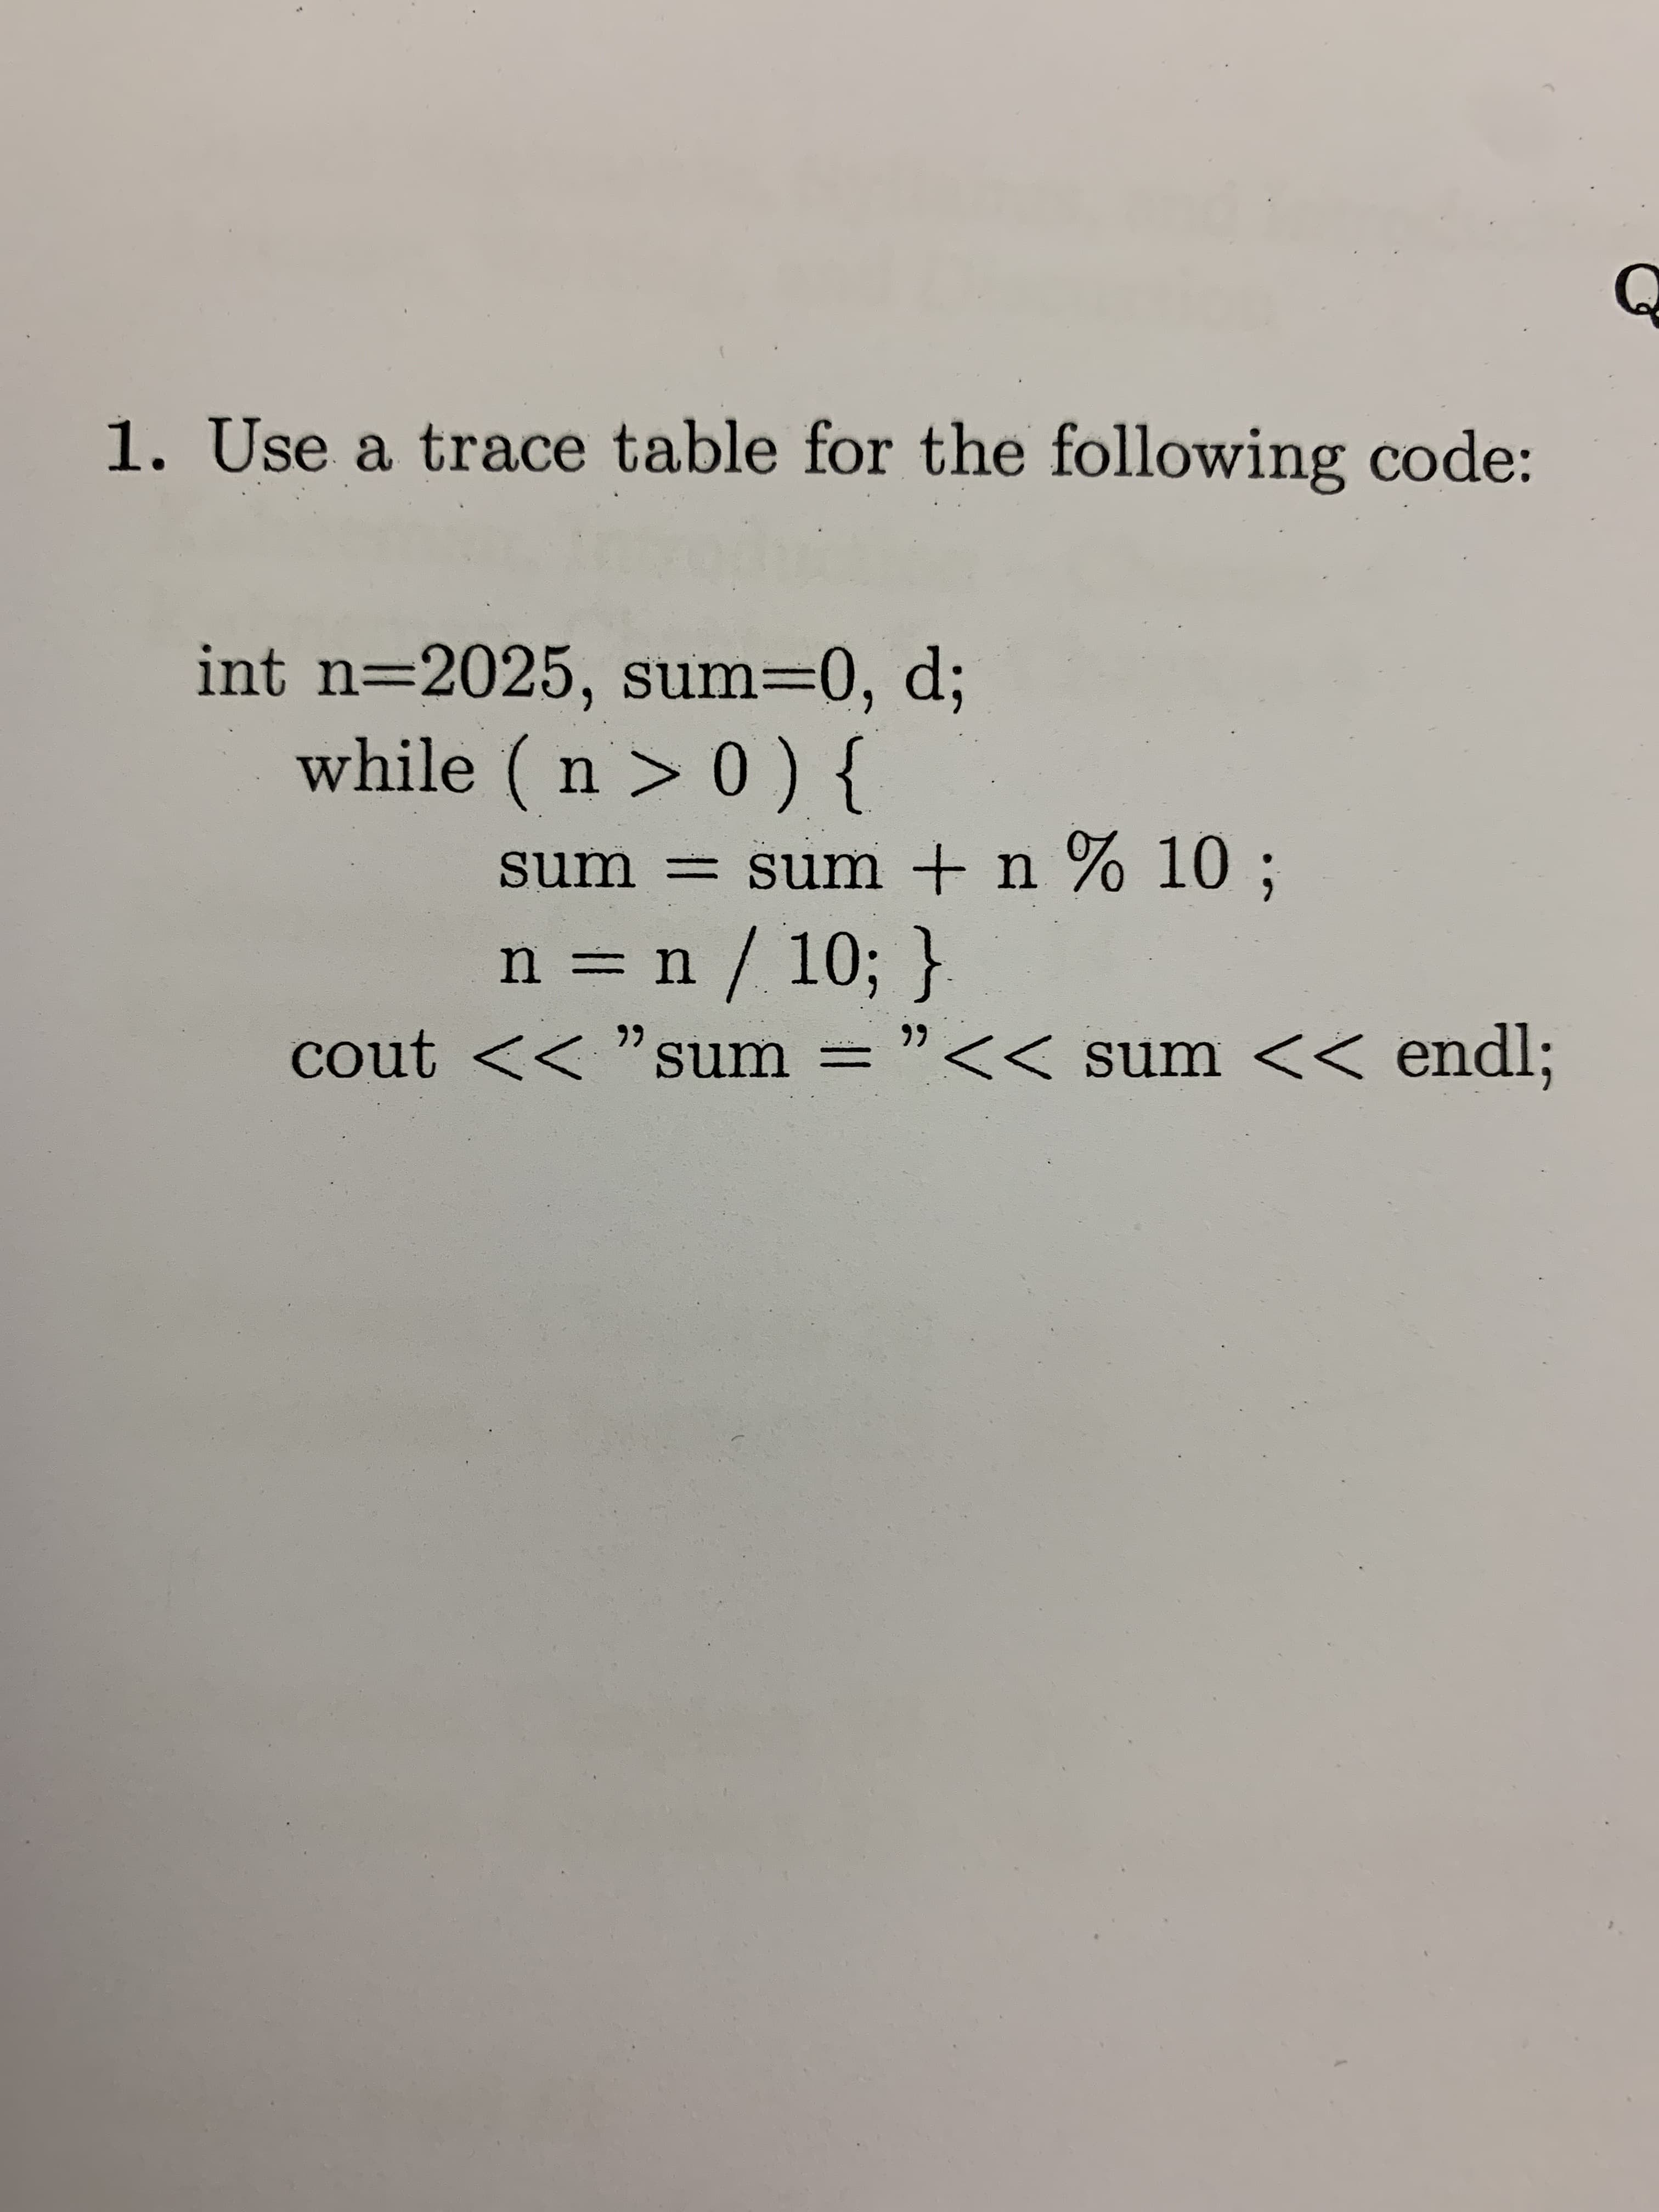 Q
1. Use a trace table for the following code:
int n-2025, sum=0, d;
while (n > 0) {
sum sum +n % 10 ;
n n / 10; }
cout <<"sum = "
<< sum << endl;
